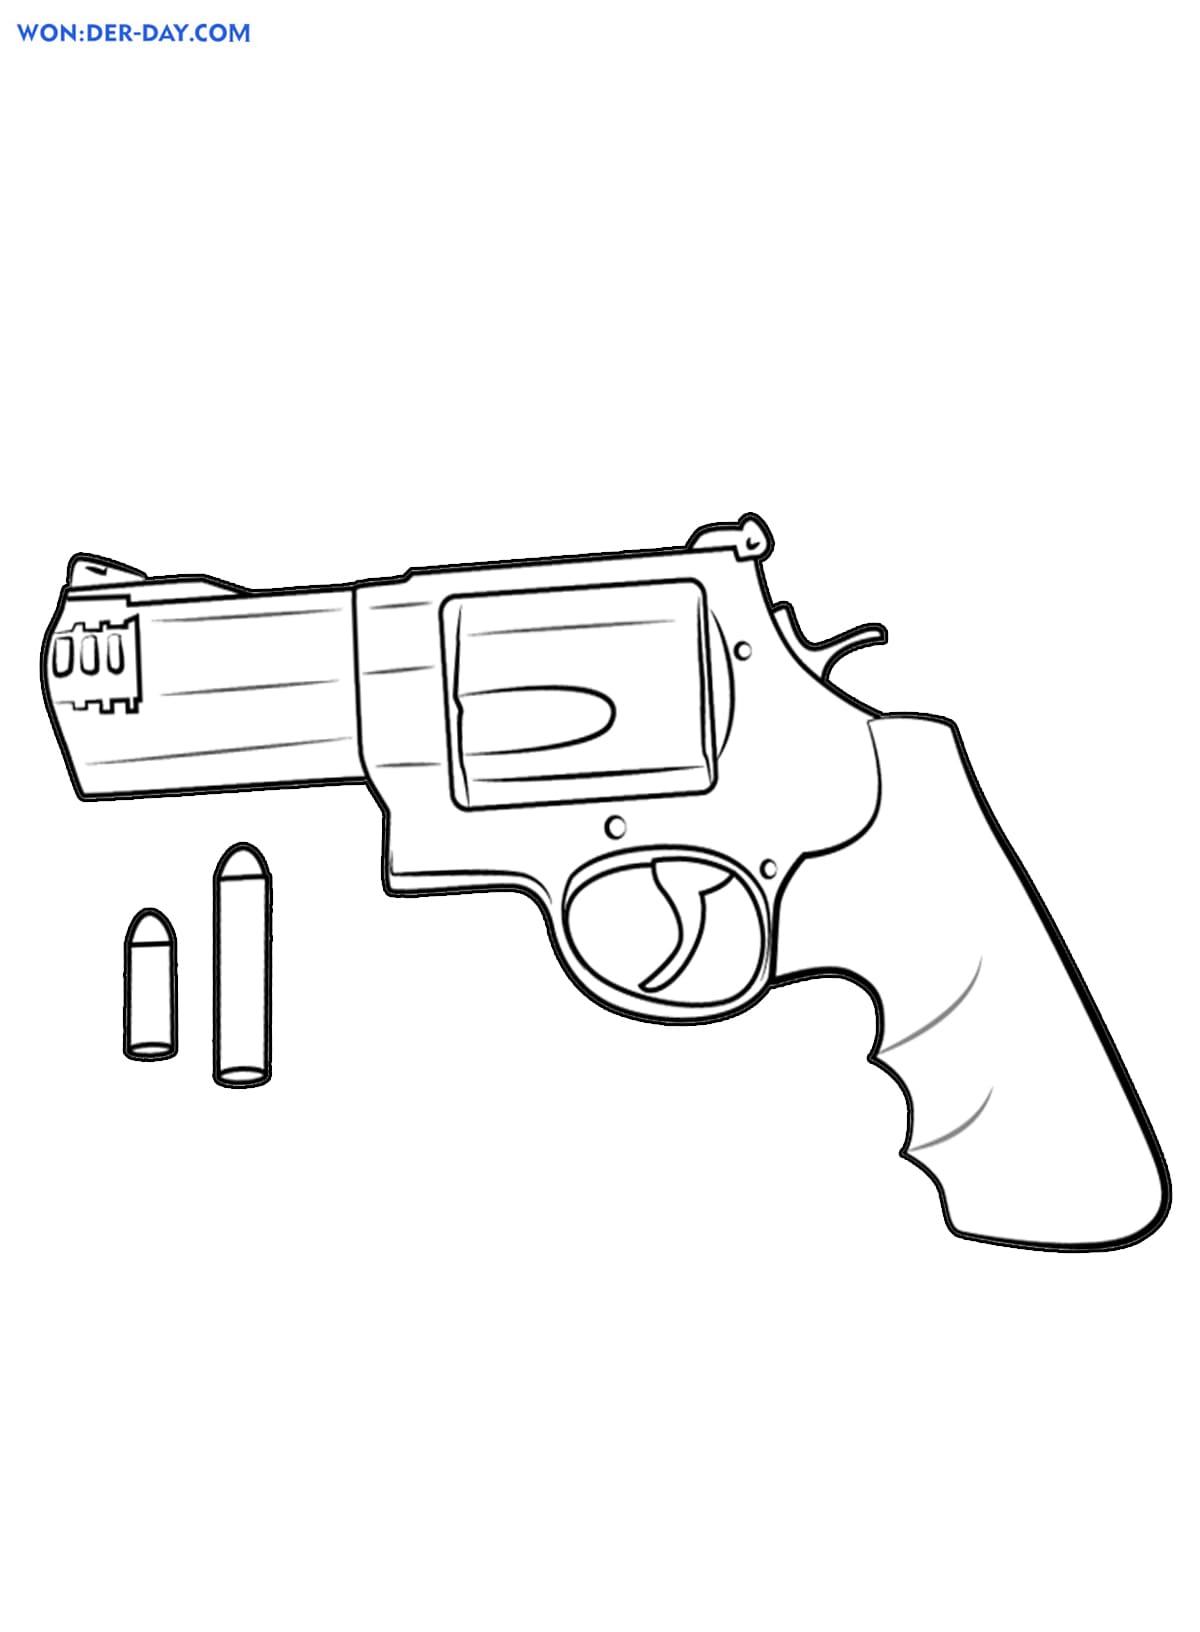 Download Weapon coloring pages . Print for boys | WONDER DAY